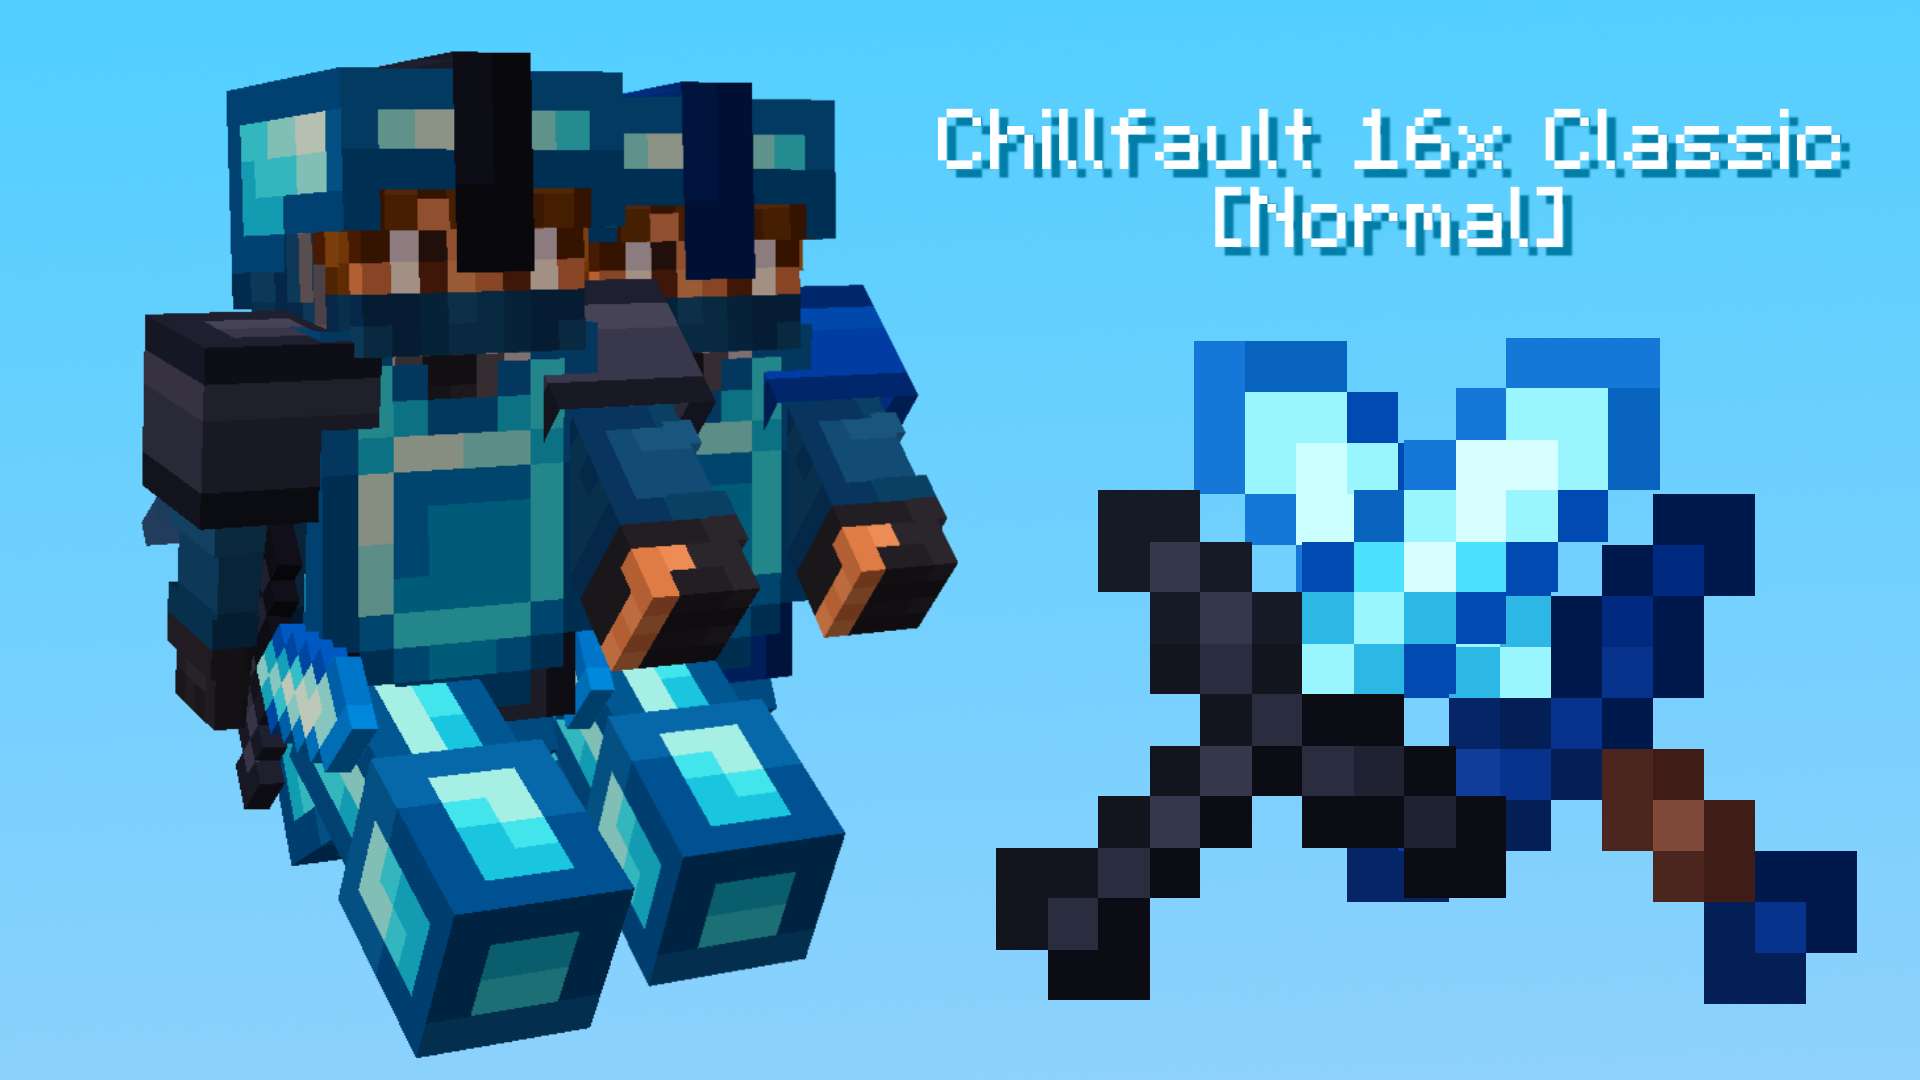 Chillfault 16x Classic [Normal] 16x by Jes13 on PvPRP